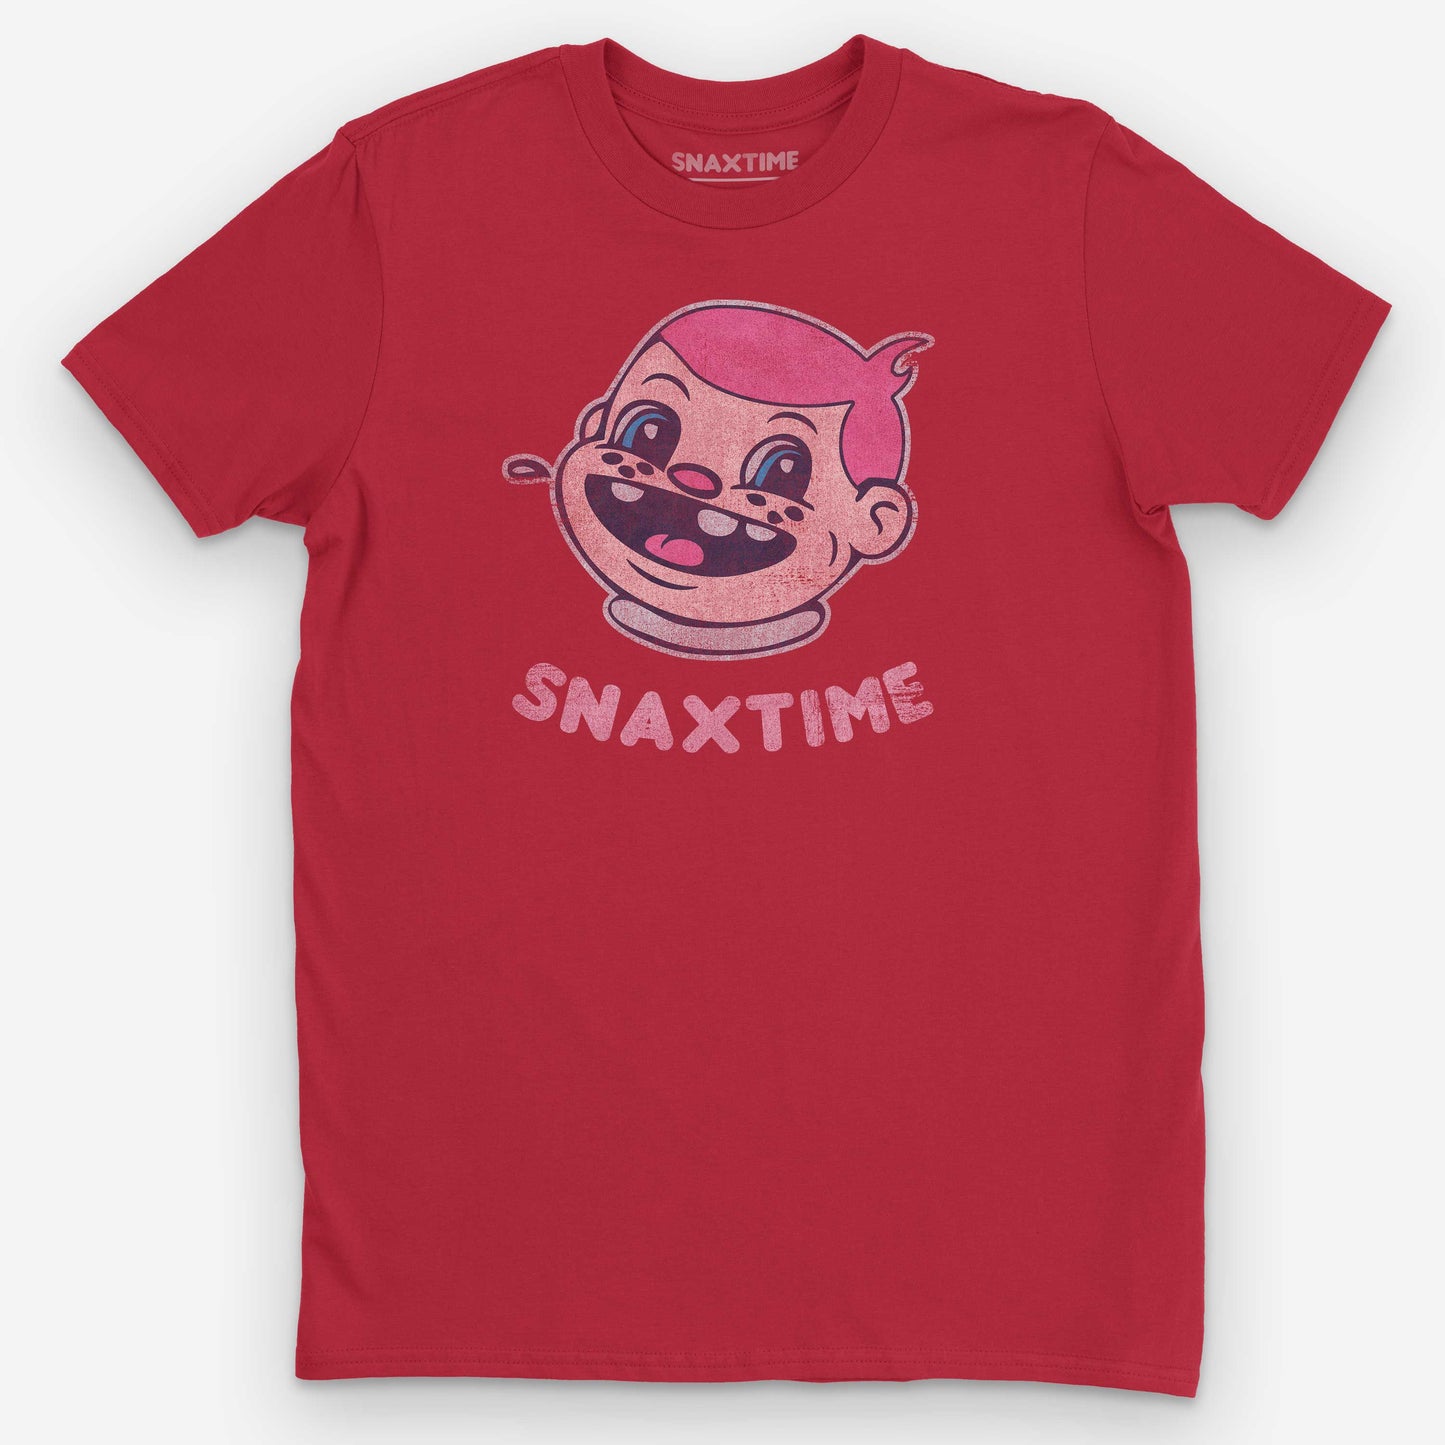 Red Snaxtime Original Graphic T-Shirt by Snaxtime